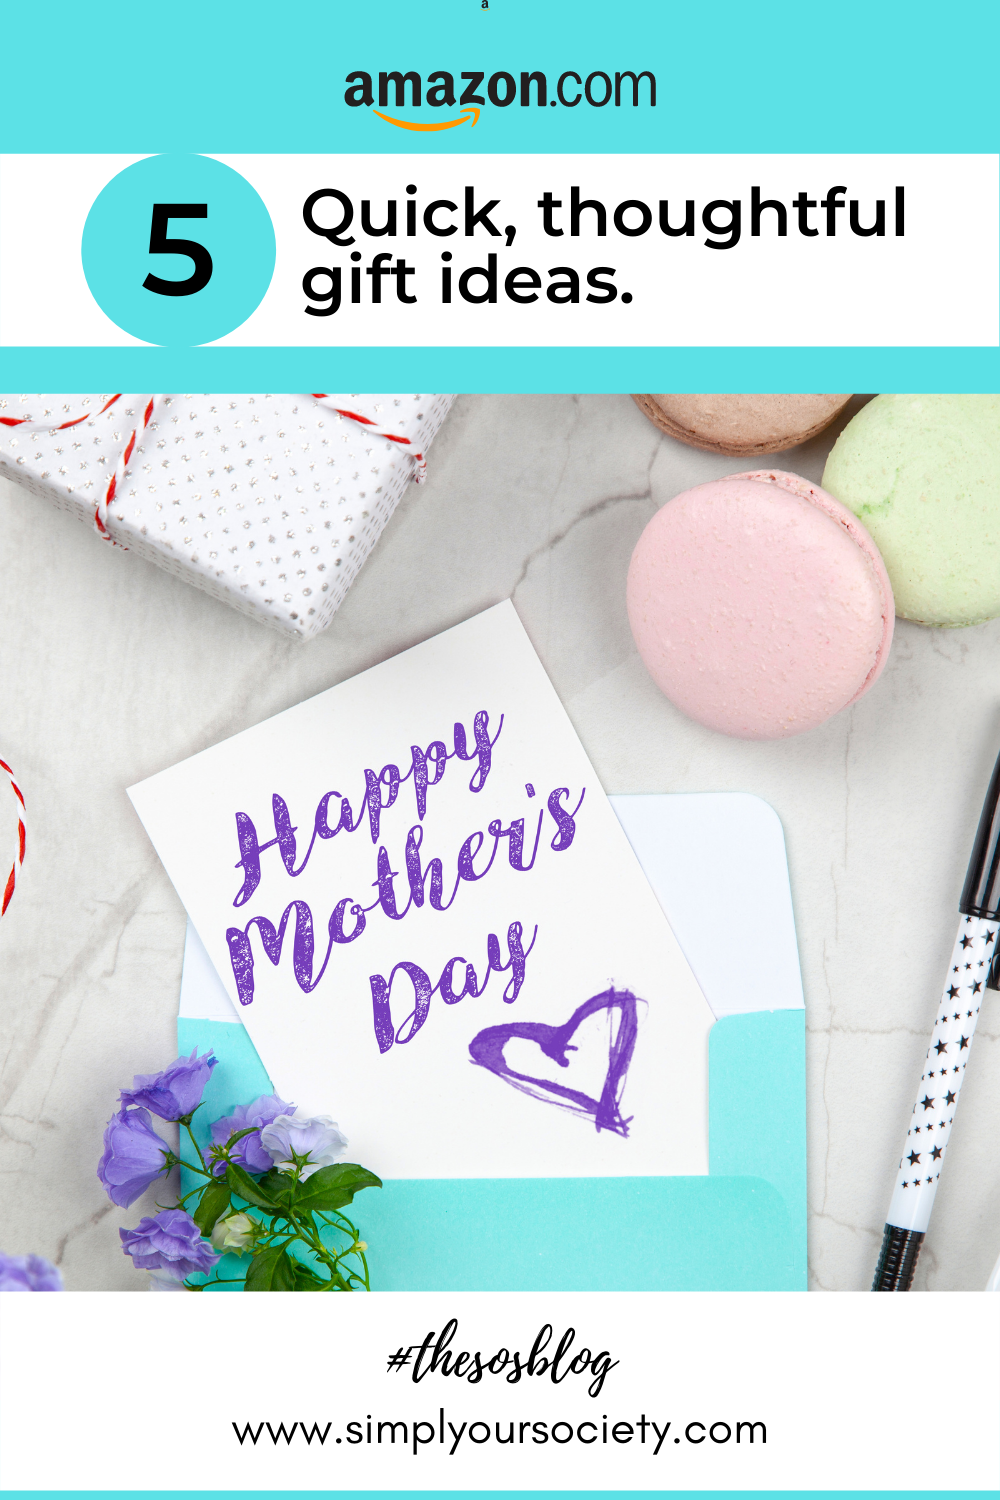 Pinterest Pin 5 quick thoughtful gifts for mothers day with Happy mothers day card in image, mothers day gifts from daugher, mothers day gifts amazon, personalized mothers day gifts, mothers day gifts from son